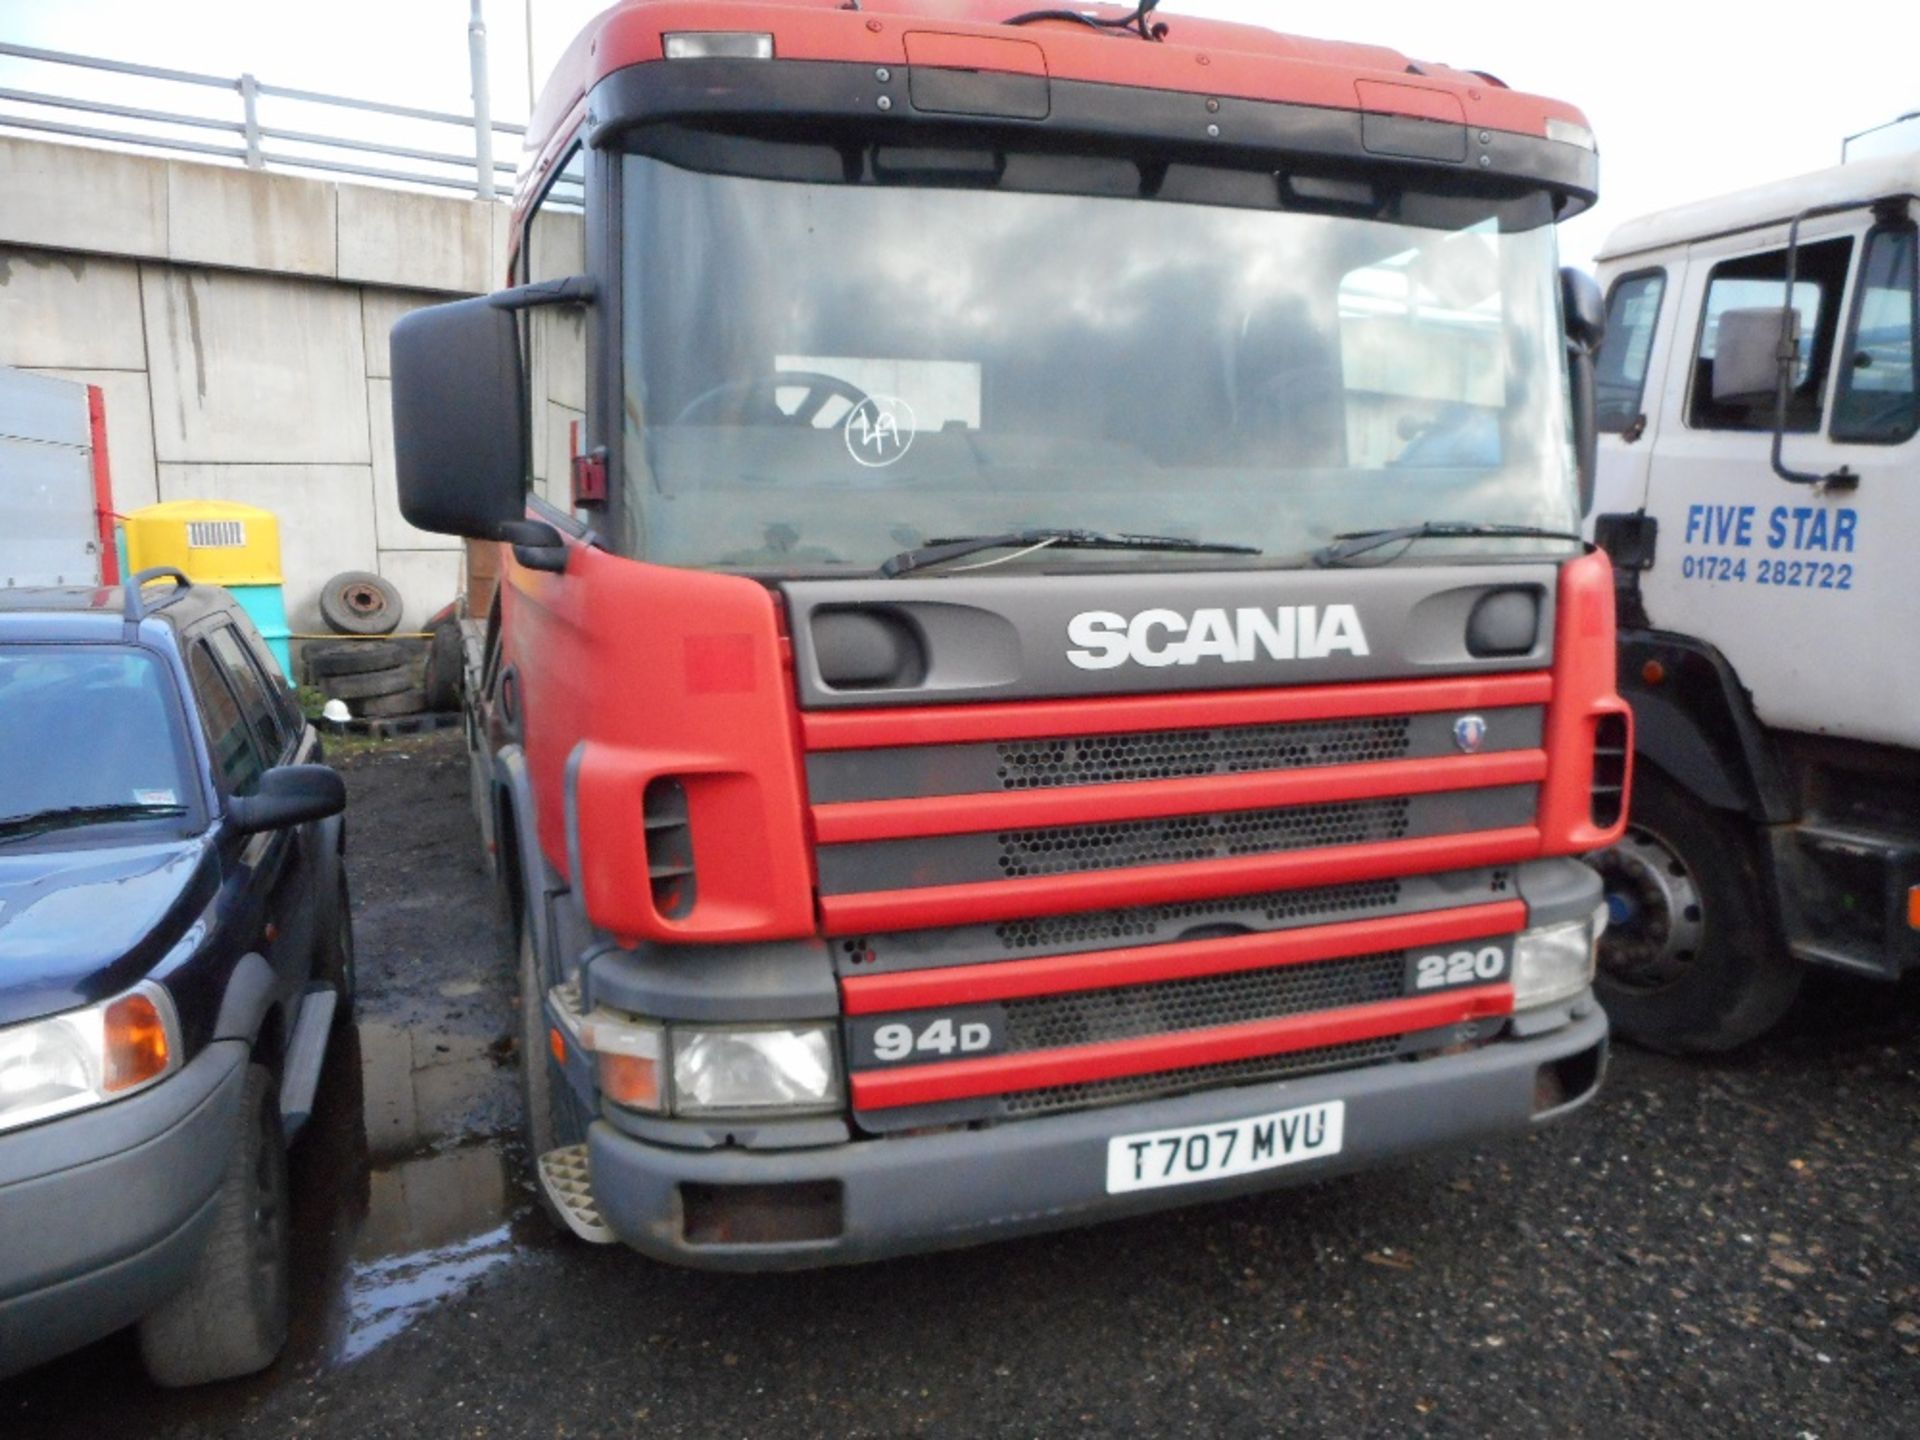 Scania 94D 220 4x2 recovery lorry with sleeper cab reg T707 MVU. - Image 6 of 15